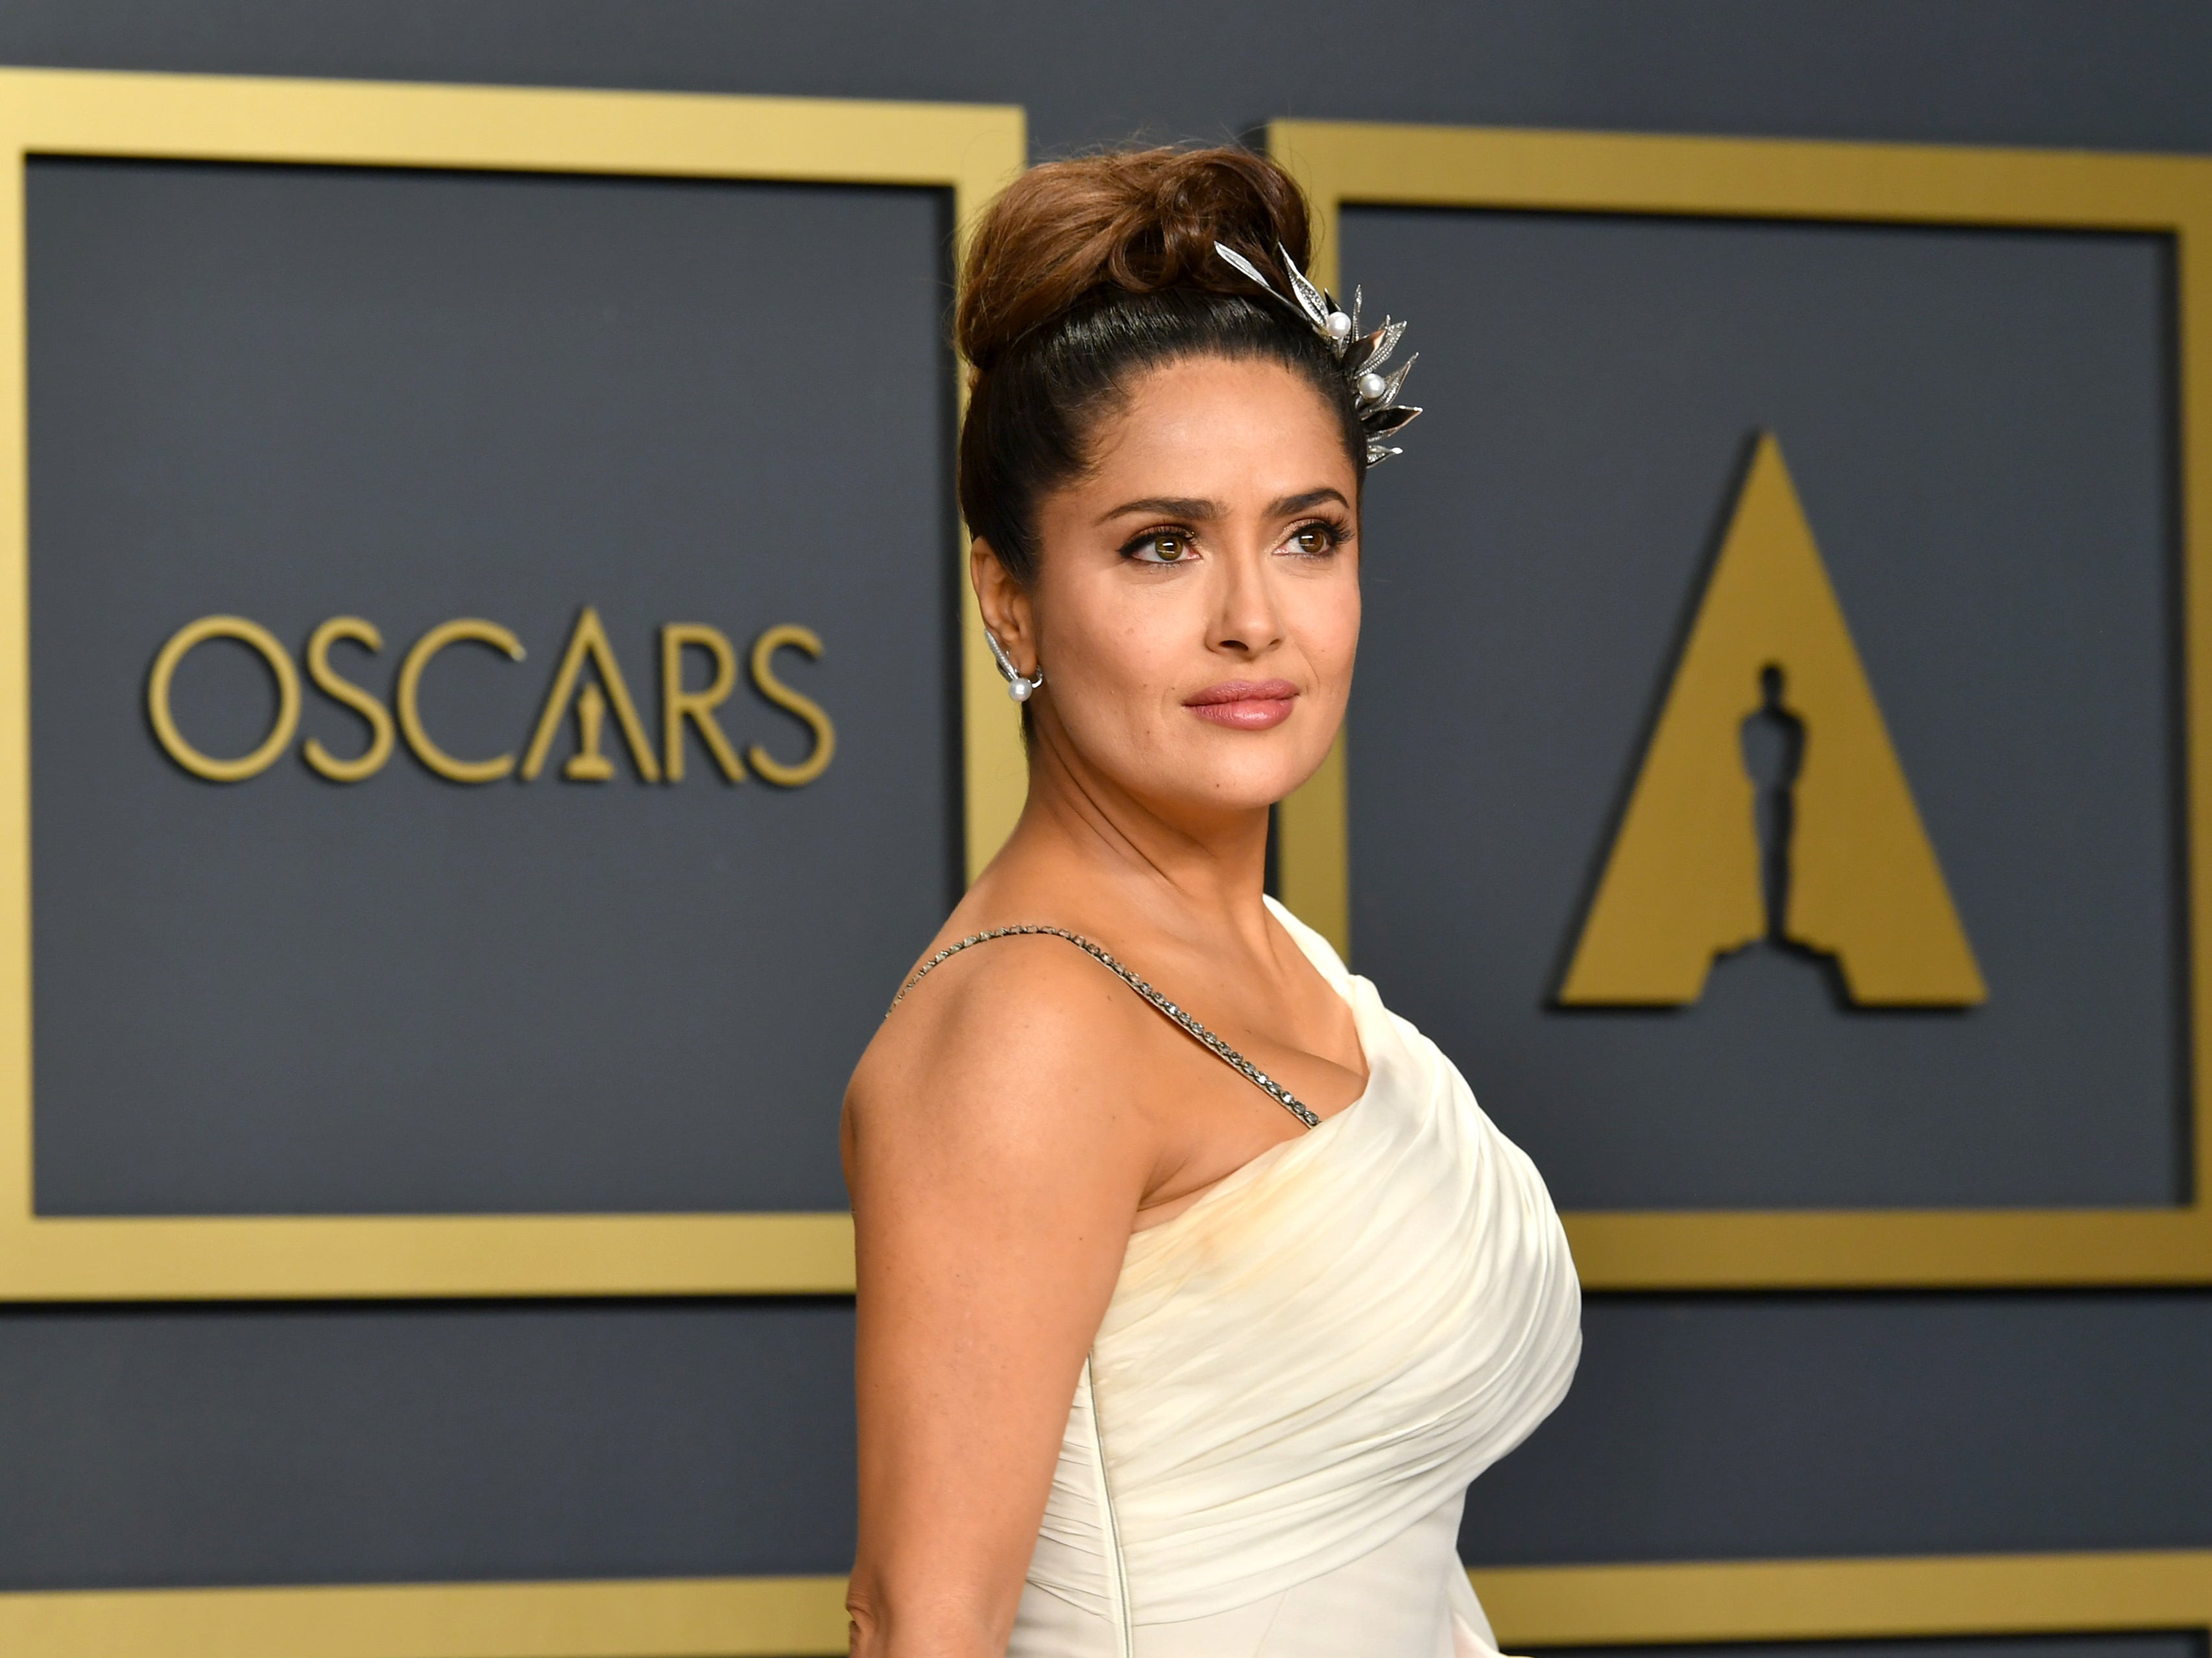 Salma Hayek at the 92nd Annual Academy Awards in Hollywood, California on 9 February 2020